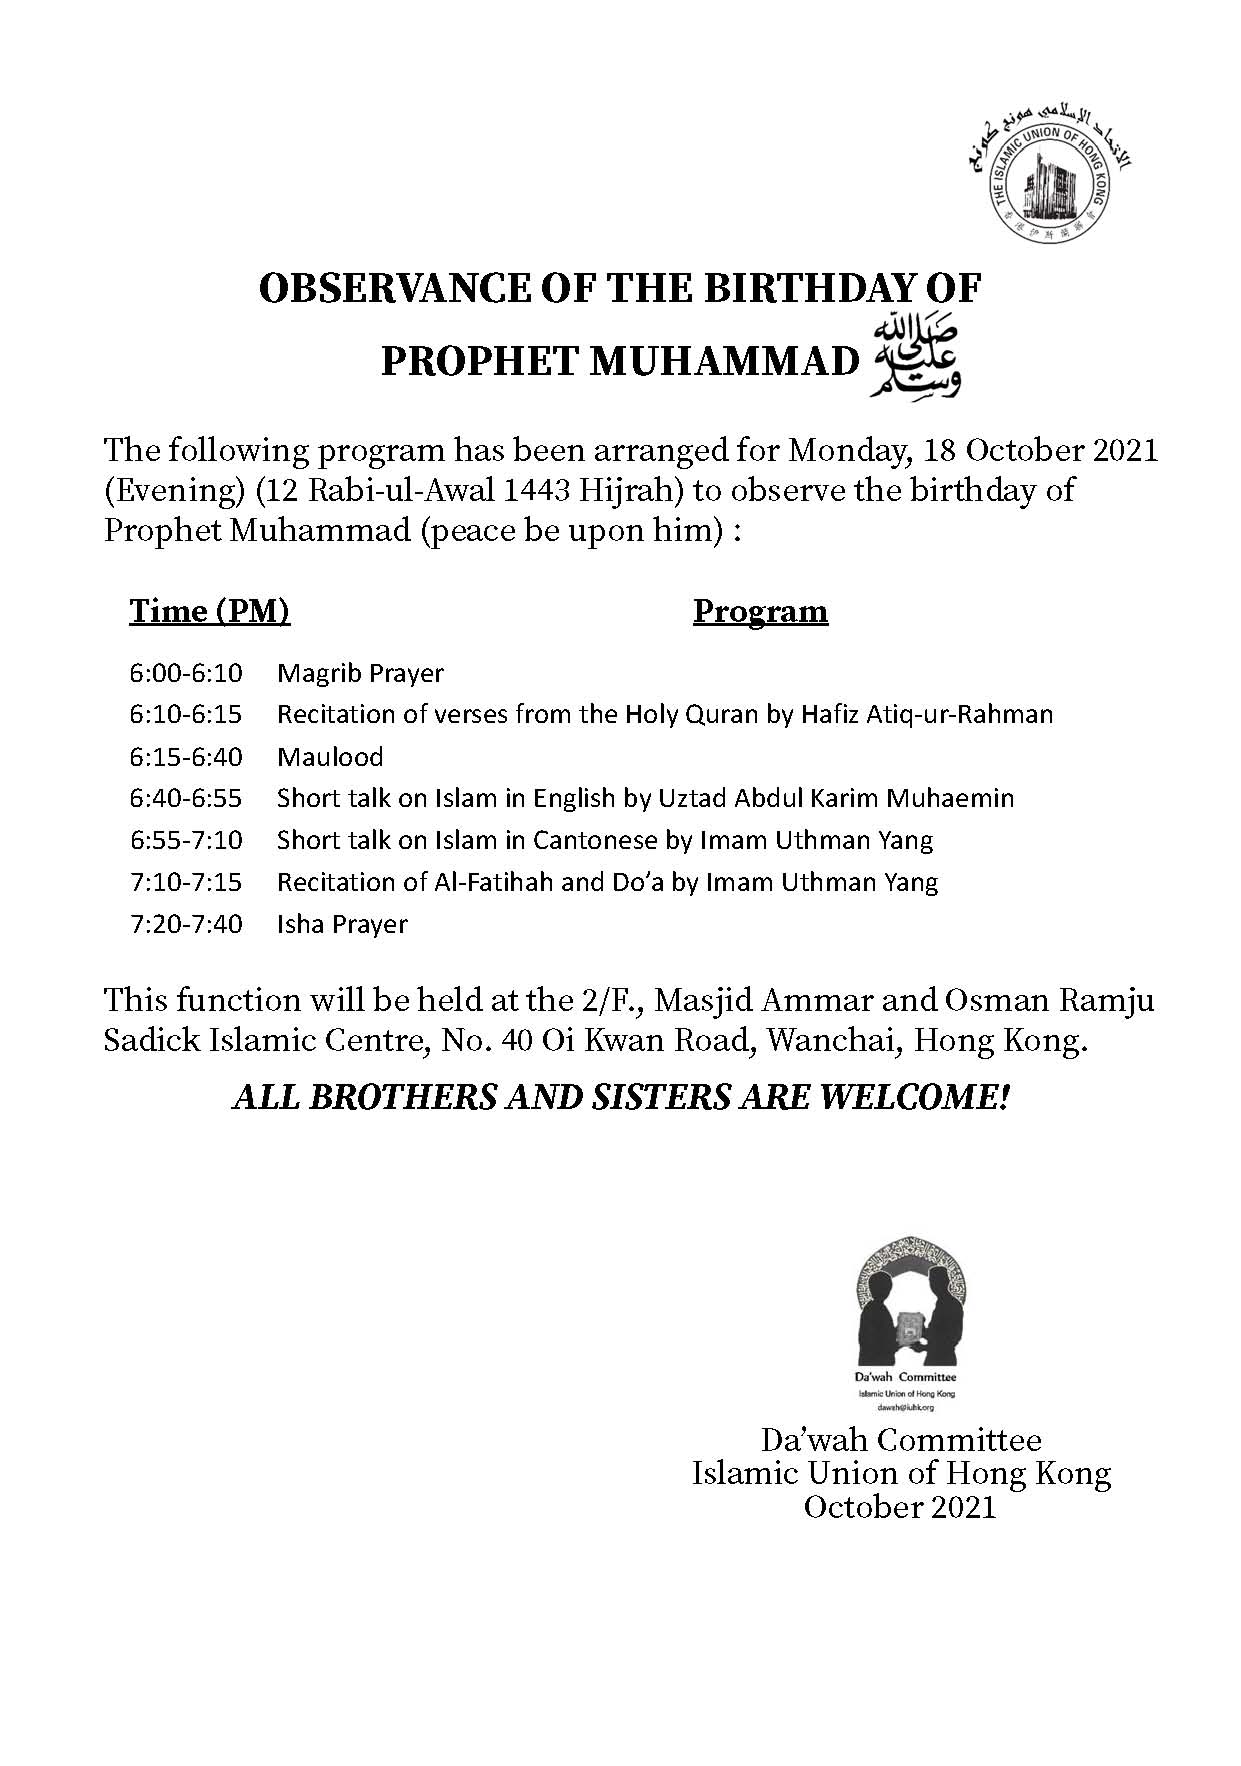 Observance of the birthday of Prophet Muhammad (peace be upon him)